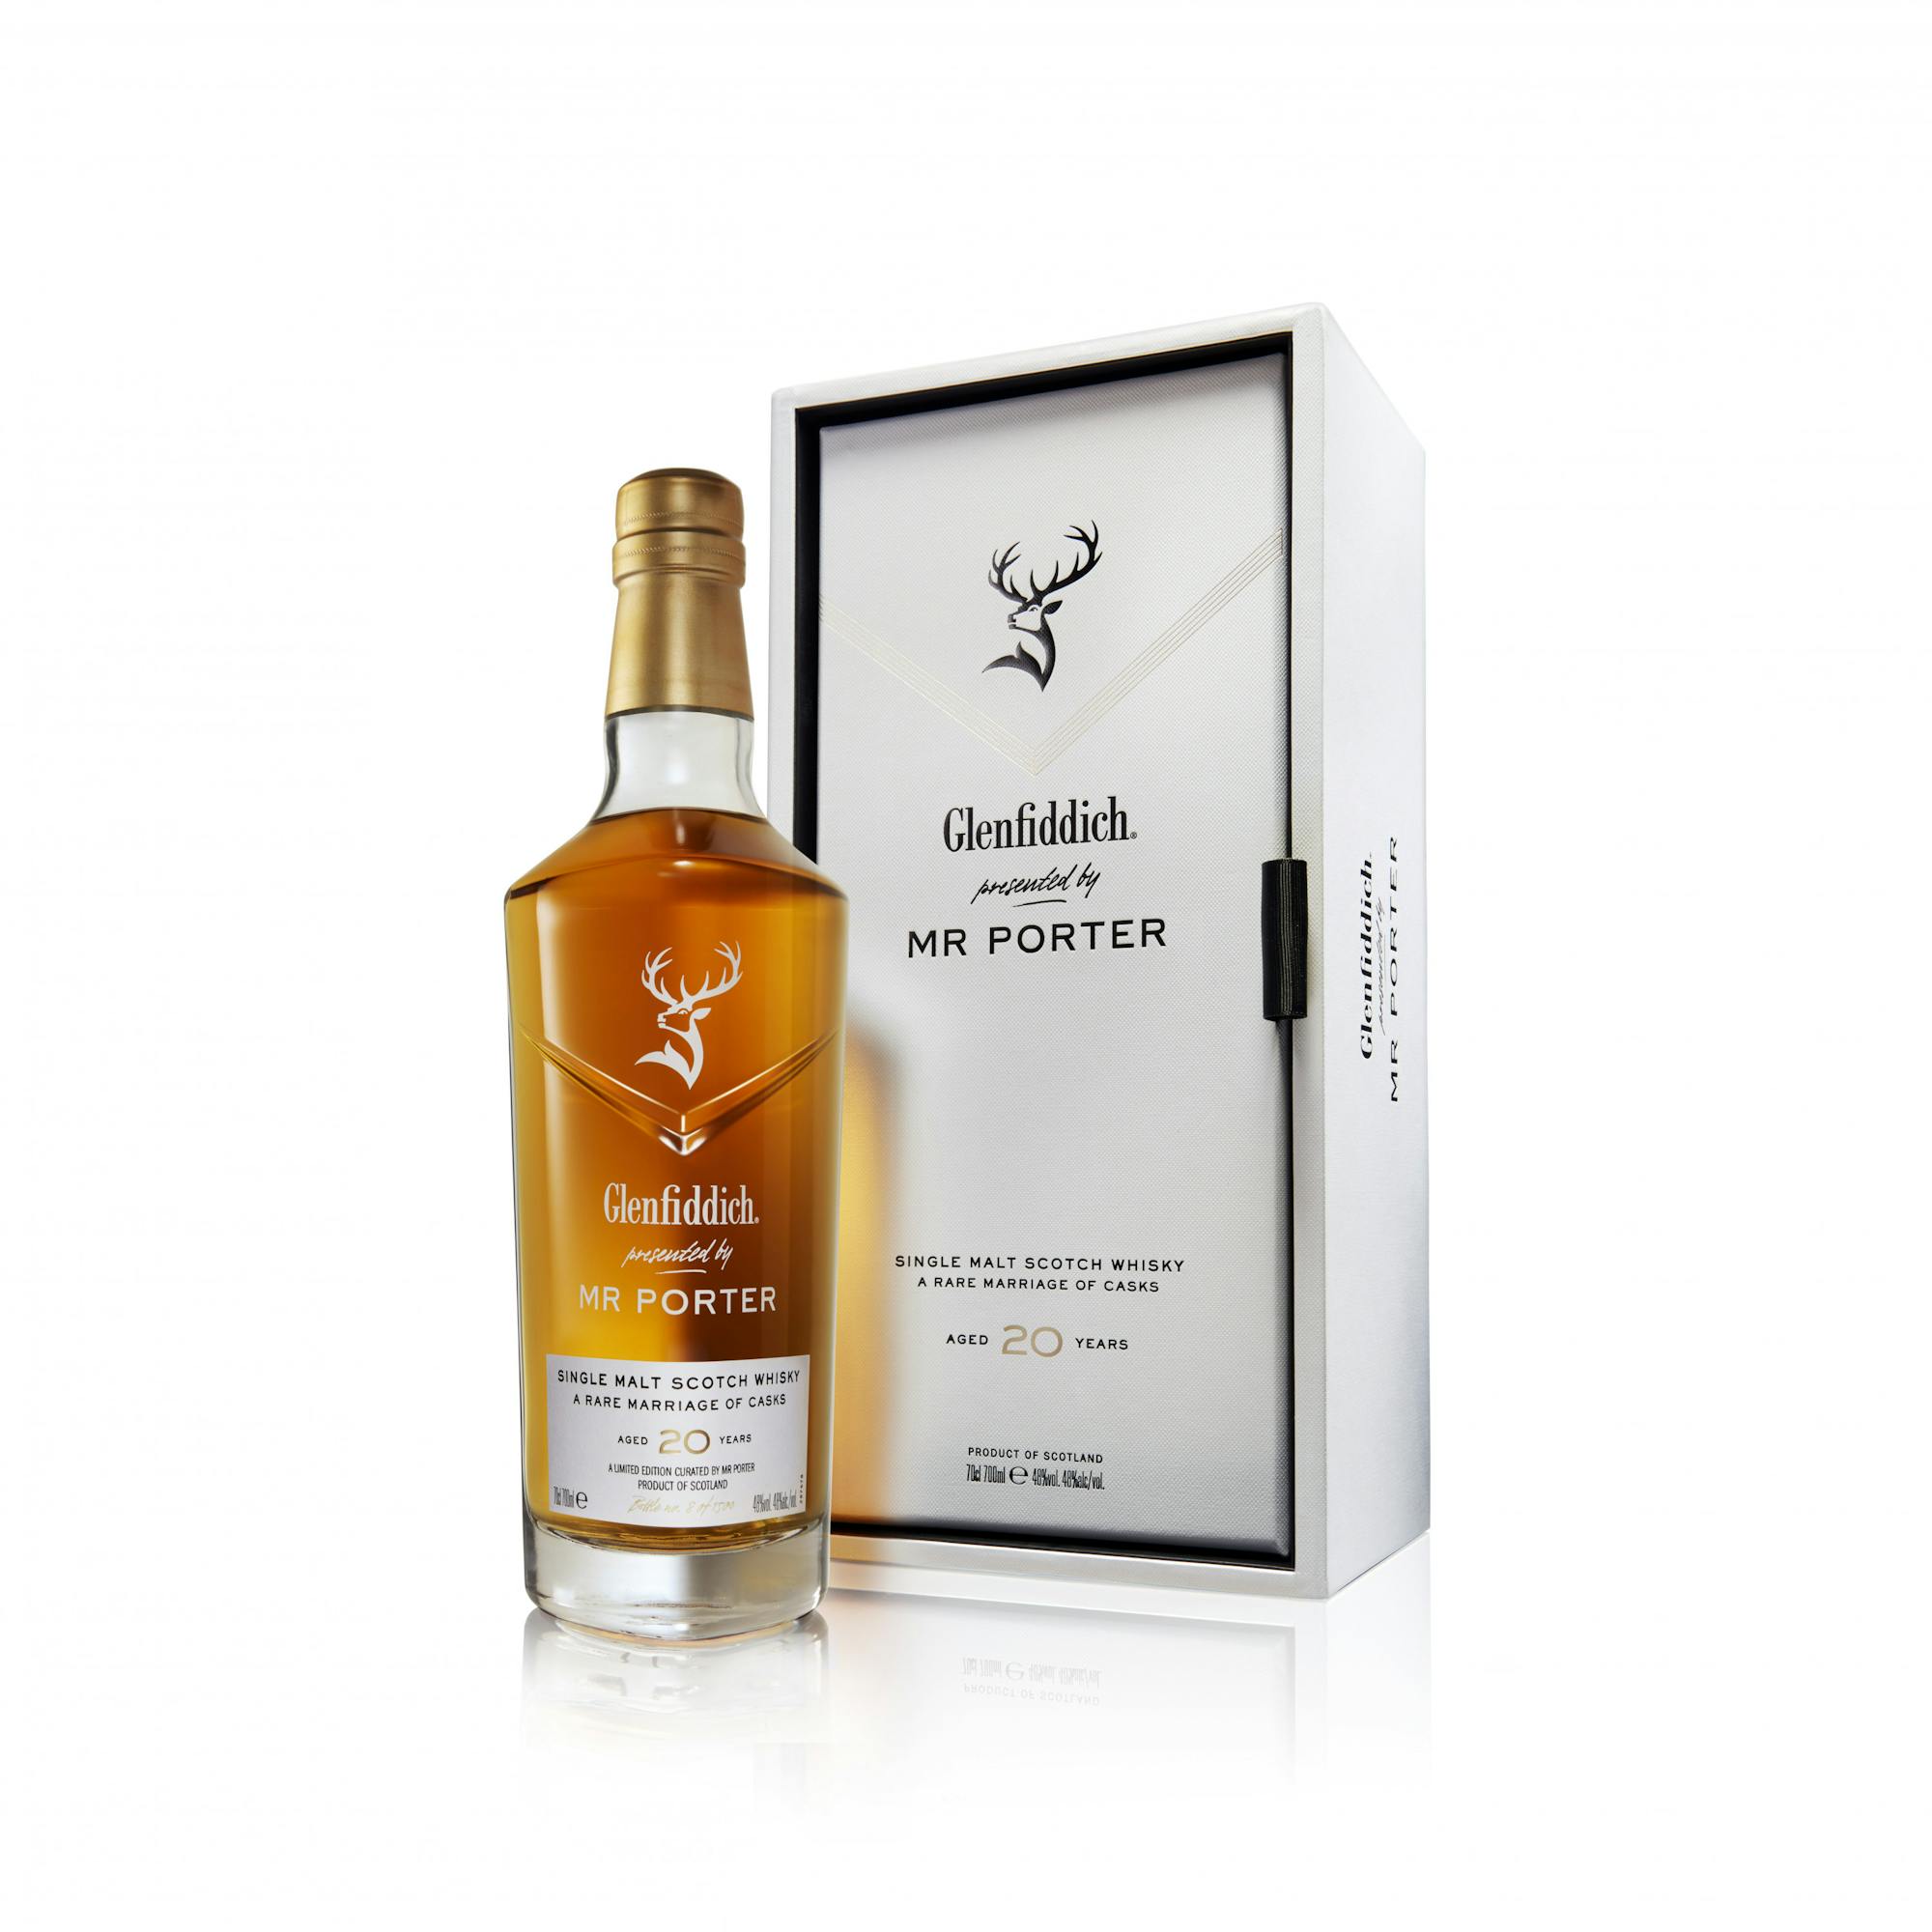 Member News Glenfiddich X MR PORTER unite in a first-of-its-kind collaboration 